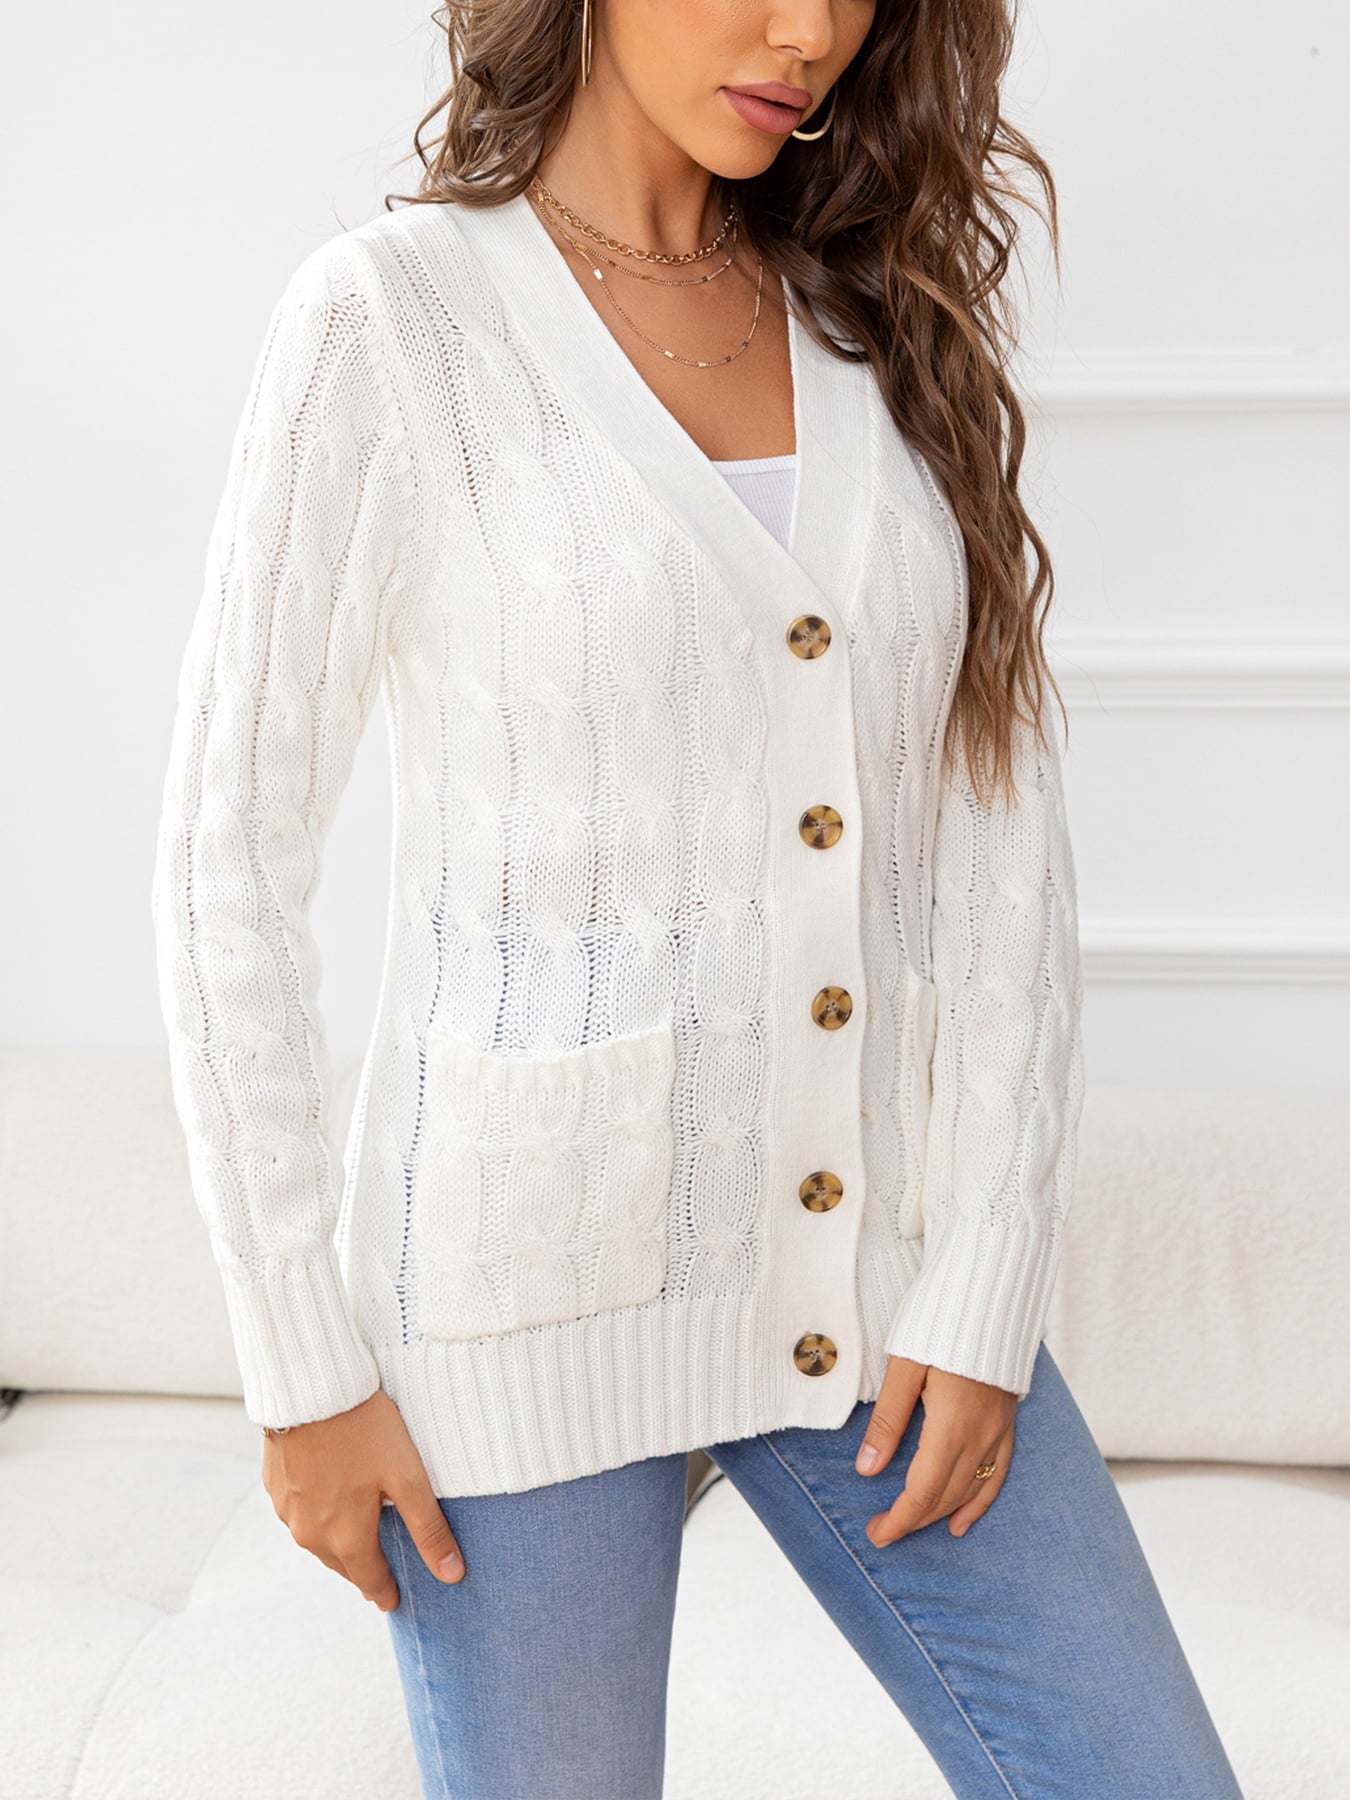 Button Down Cable-Knit Cardigan - Women’s Clothing & Accessories - Shirts & Tops - 17 - 2024